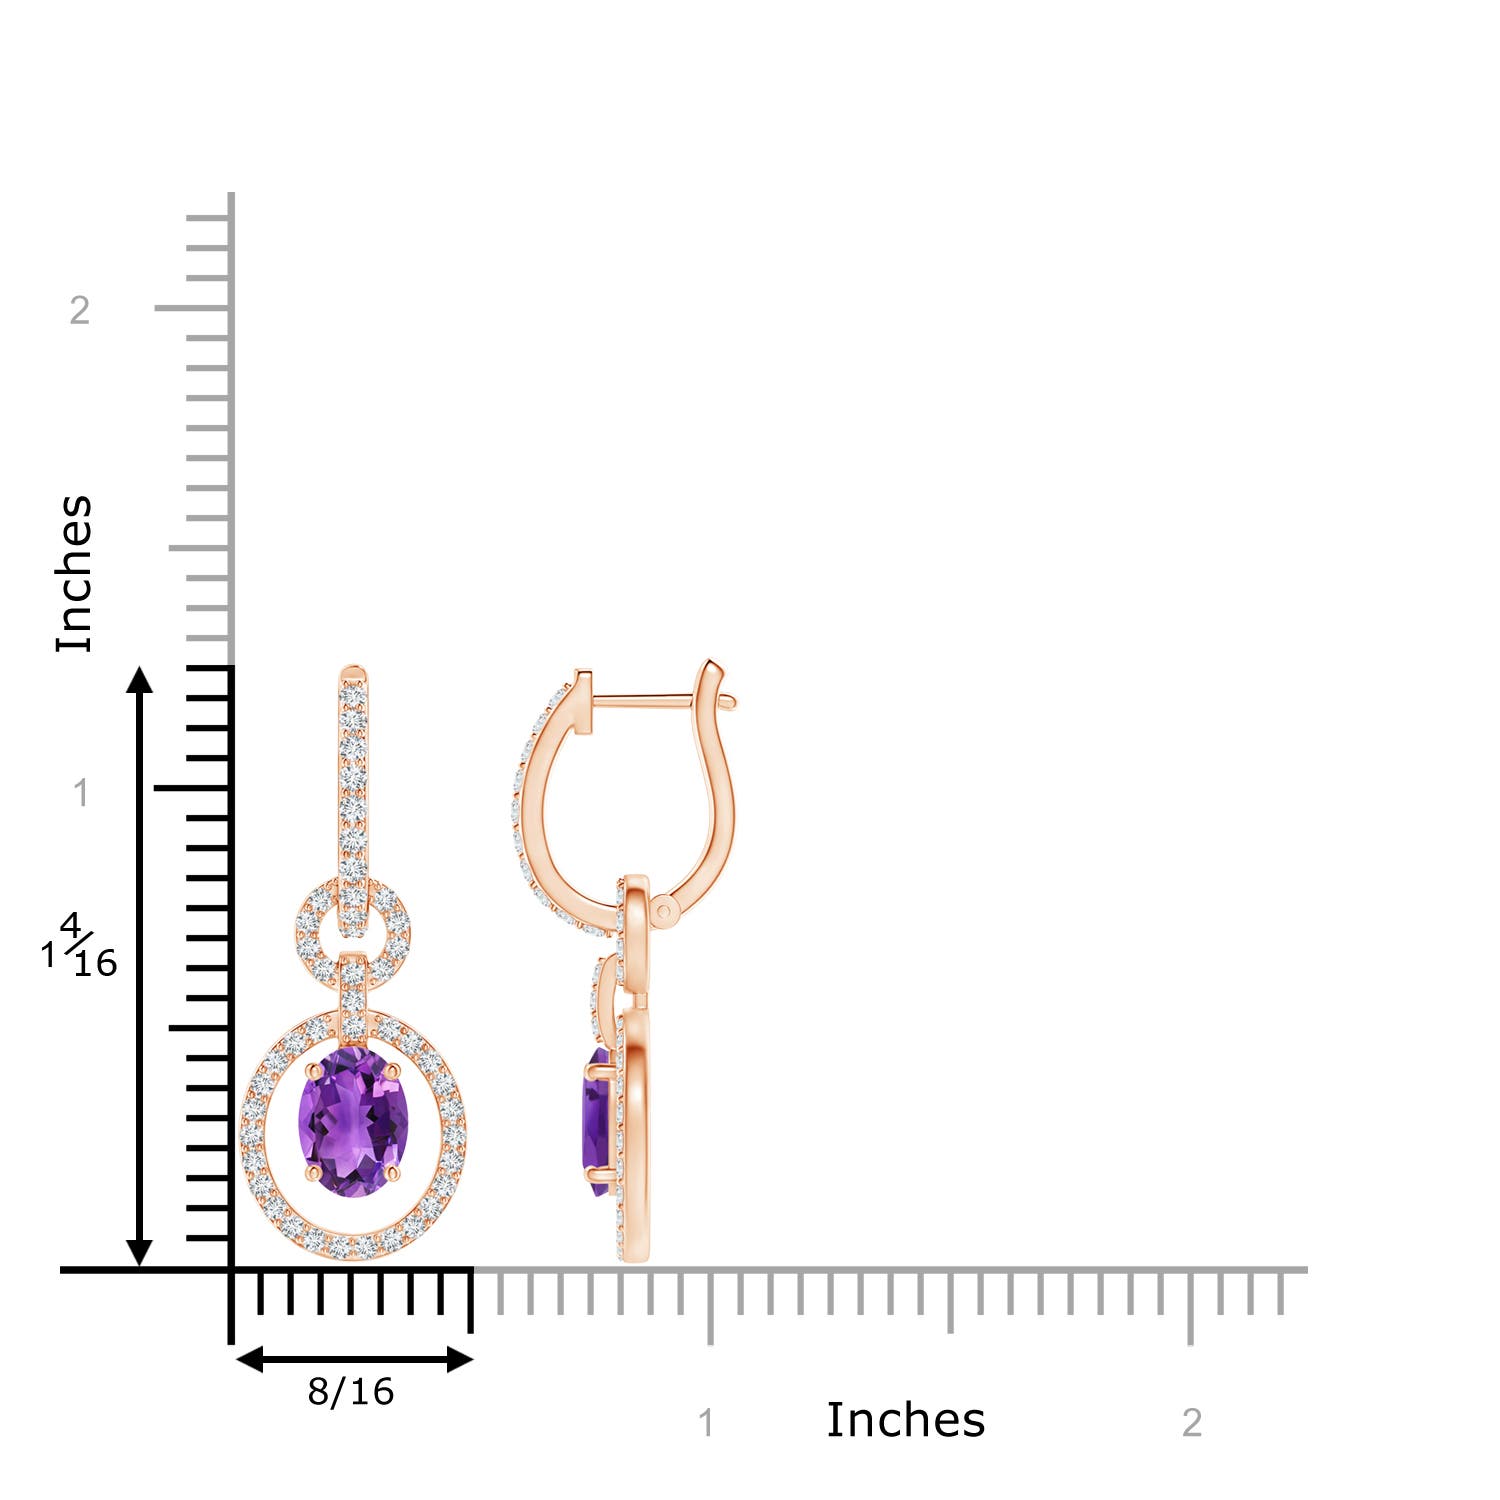 AAA - Amethyst / 2.02 CT / 14 KT Rose Gold